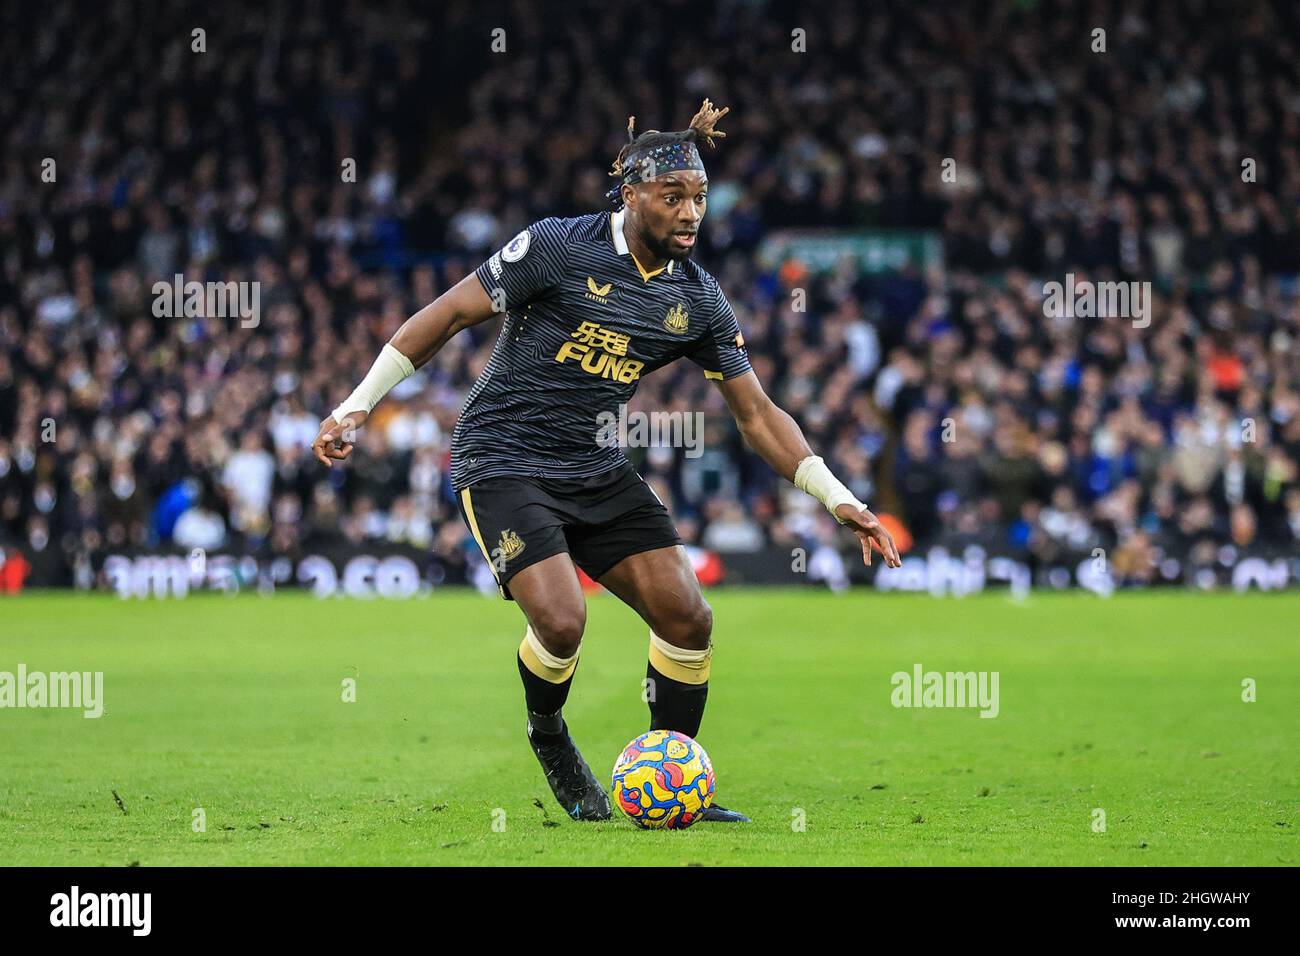 Leeds, UK. 22nd Jan, 2022. Allan Saint-Maximin #10 of Newcastle United during the Premier League fixture Leeds United vs Newcastle United at Elland Road, Leeds, UK, 22nd January 2022 Credit: News Images /Alamy Live News Stock Photo